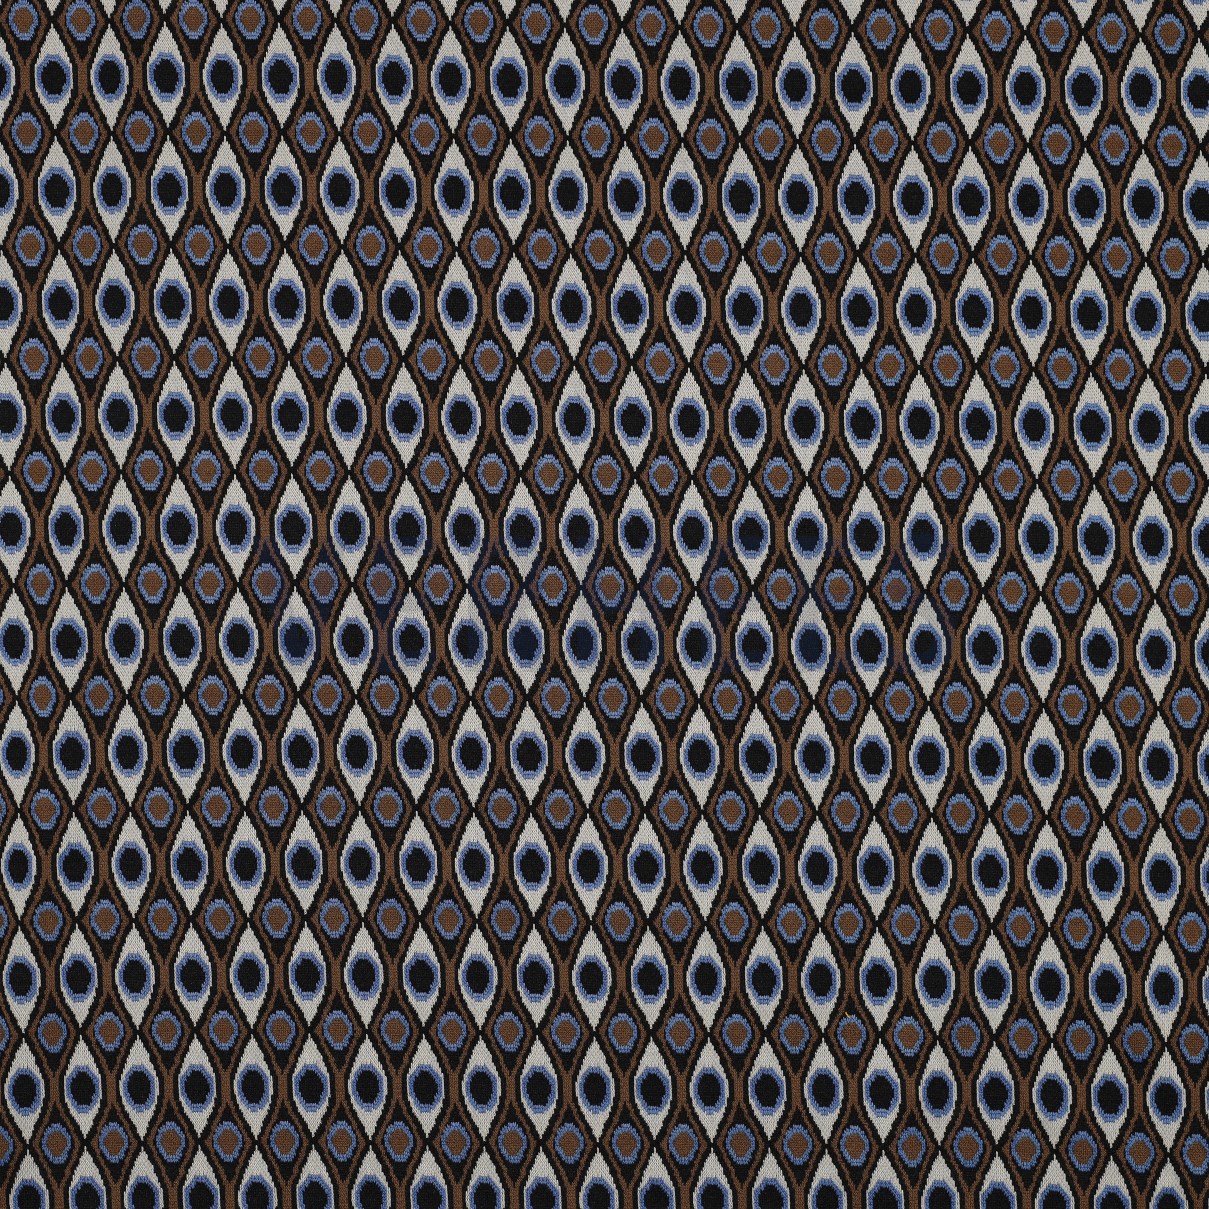 KNITTED JACQUARD MULTI BROWN BLUE (high resolution)